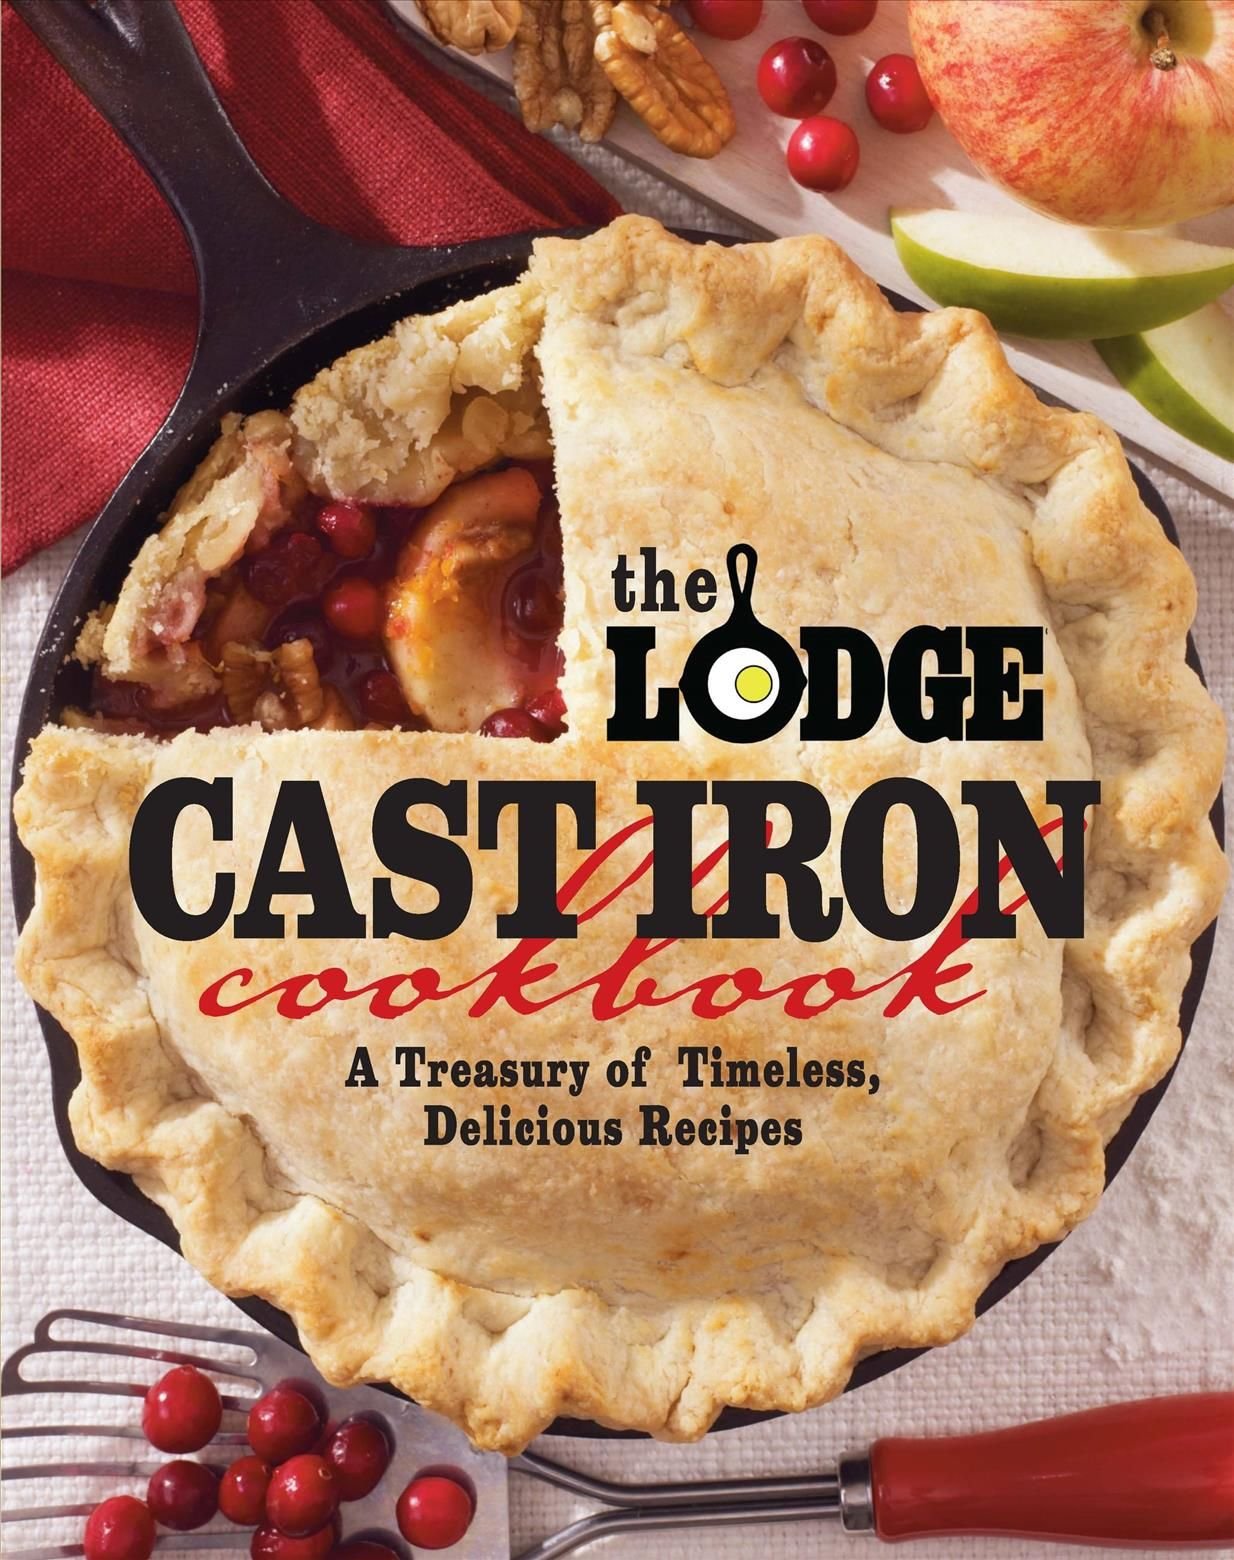 Lodge Cast Iron Cookbook, The: A Treasury of Timeless, Delicious Recipes